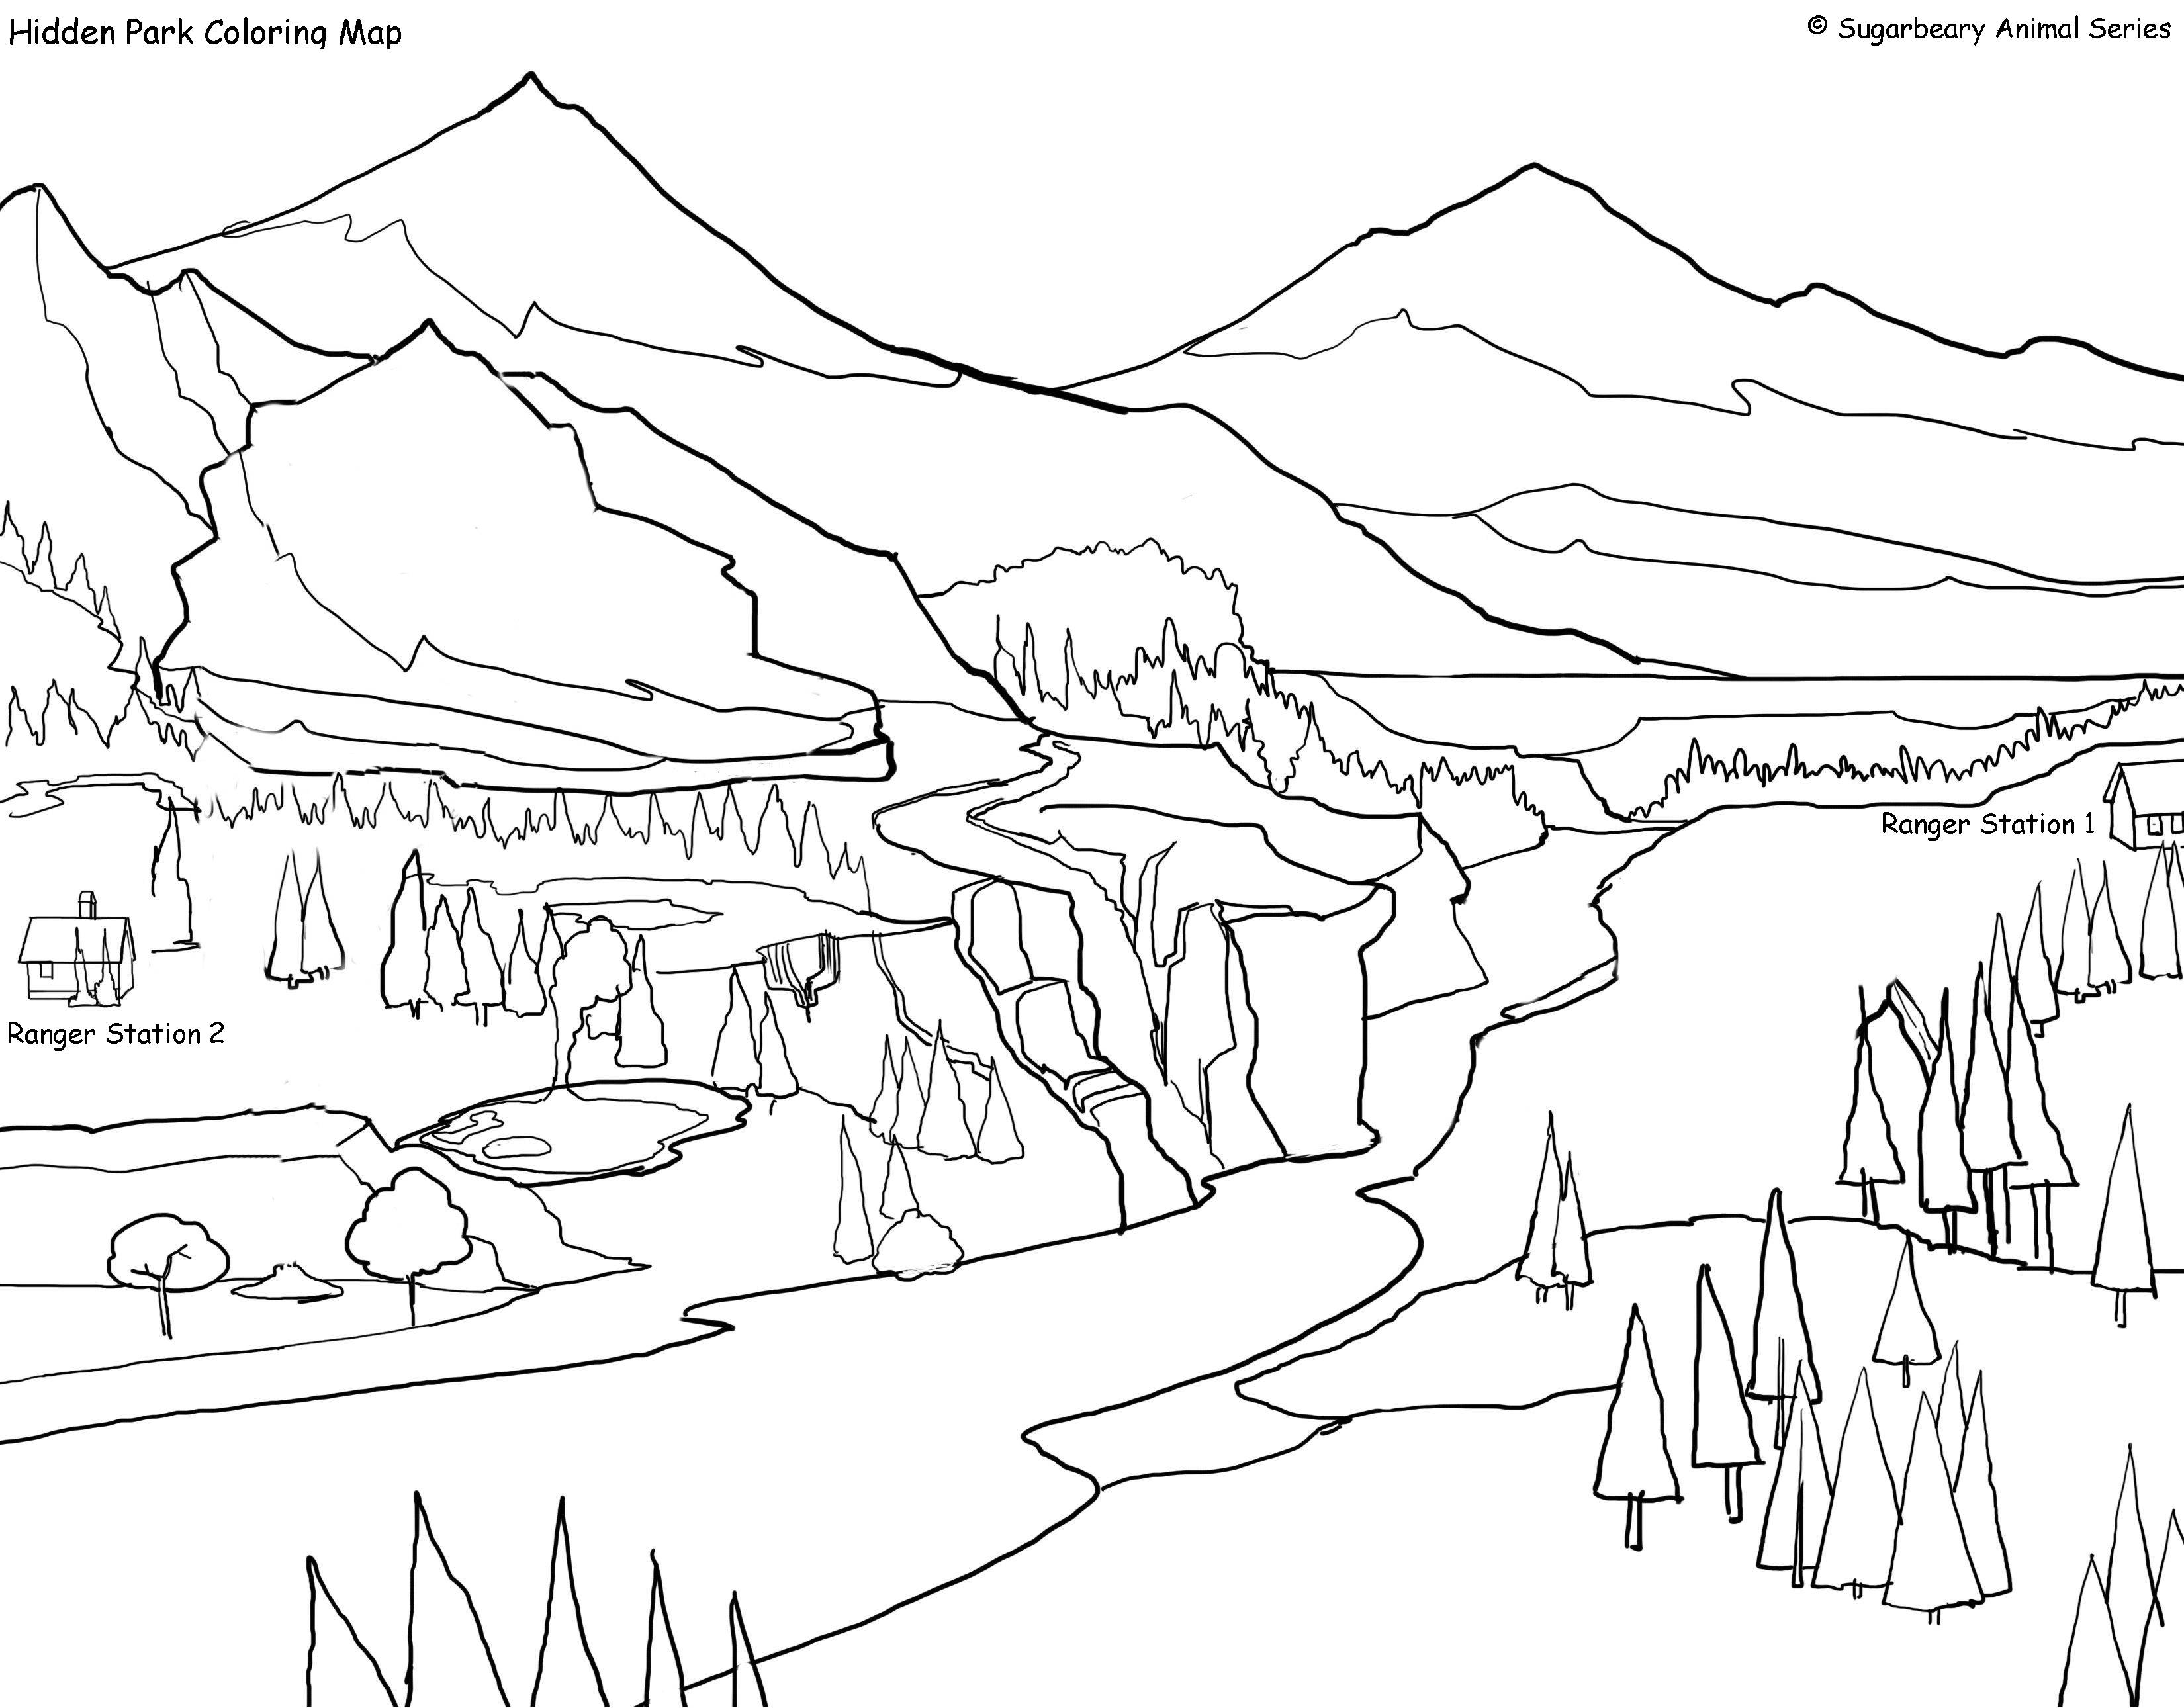 Yellowstone National Park Coloring Pages at GetColorings.com | Free